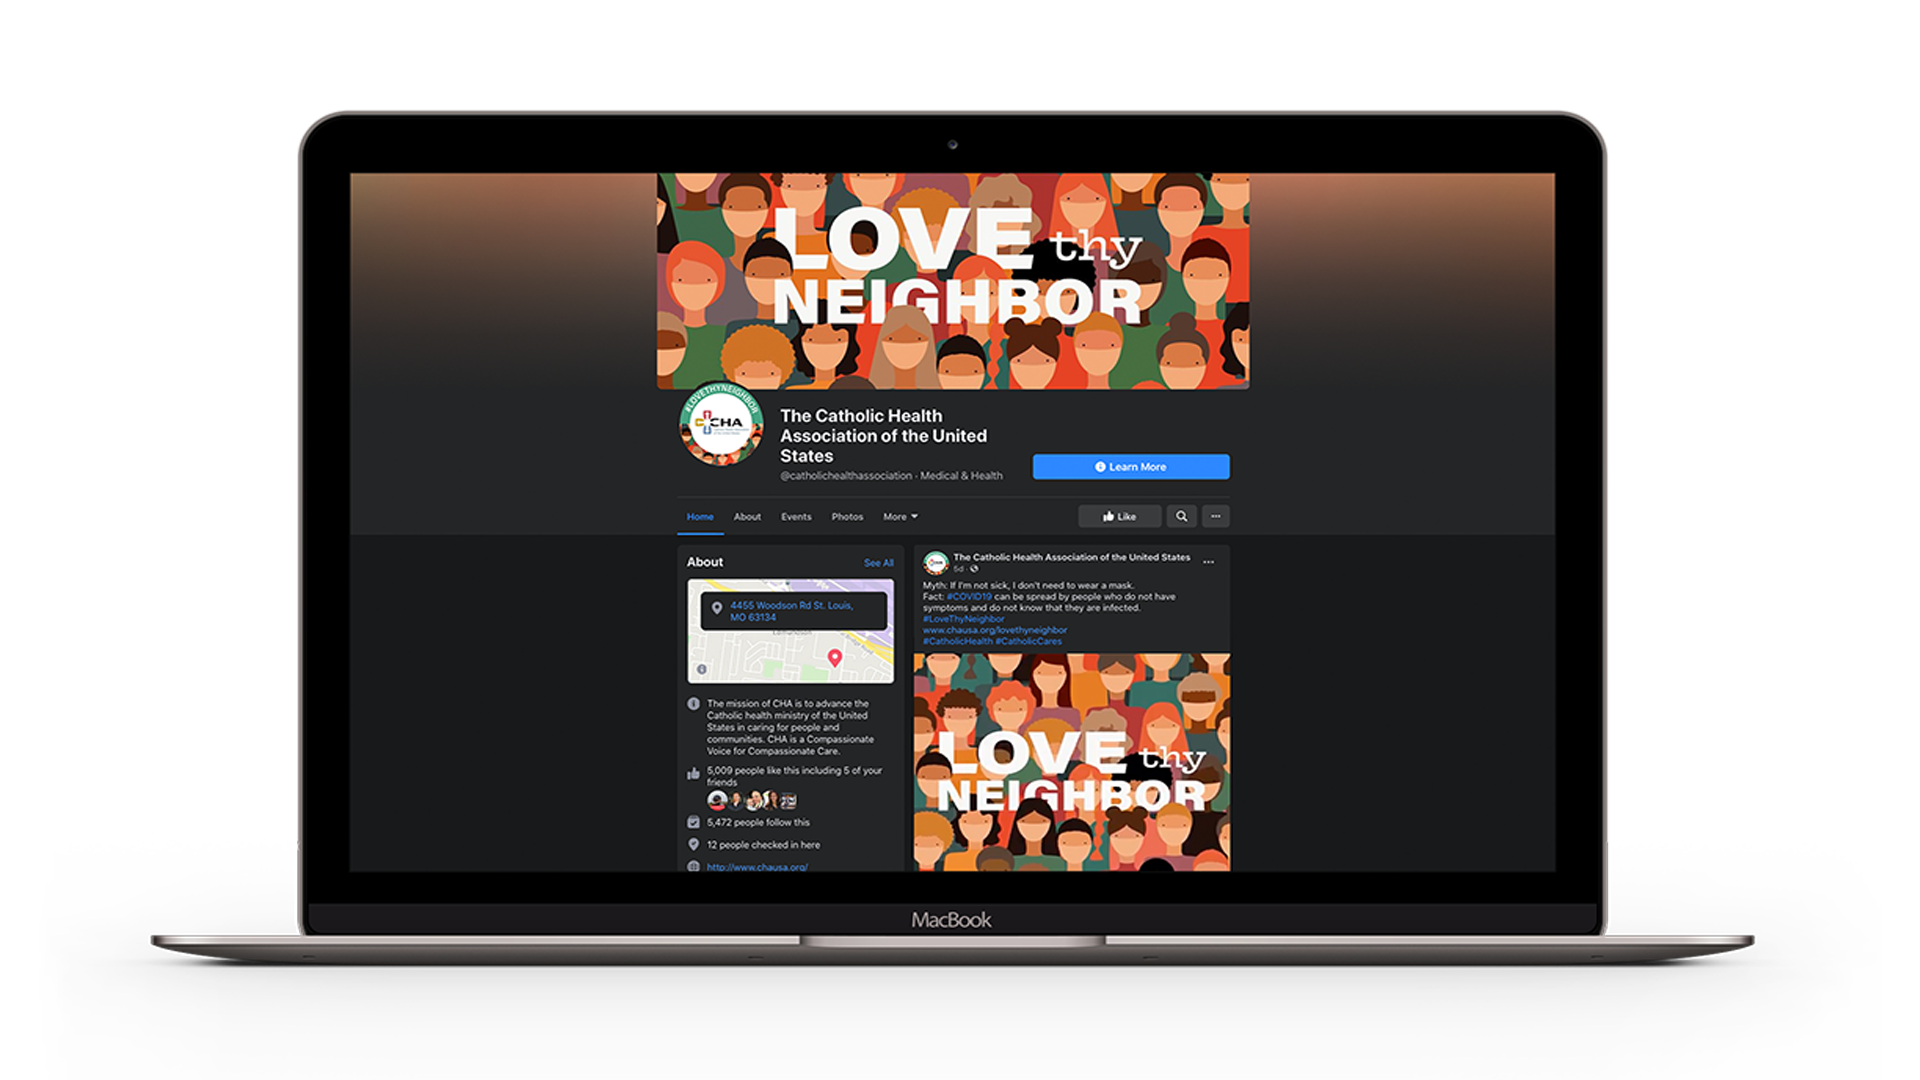 Mockup of CHA Facebook page on MacBook